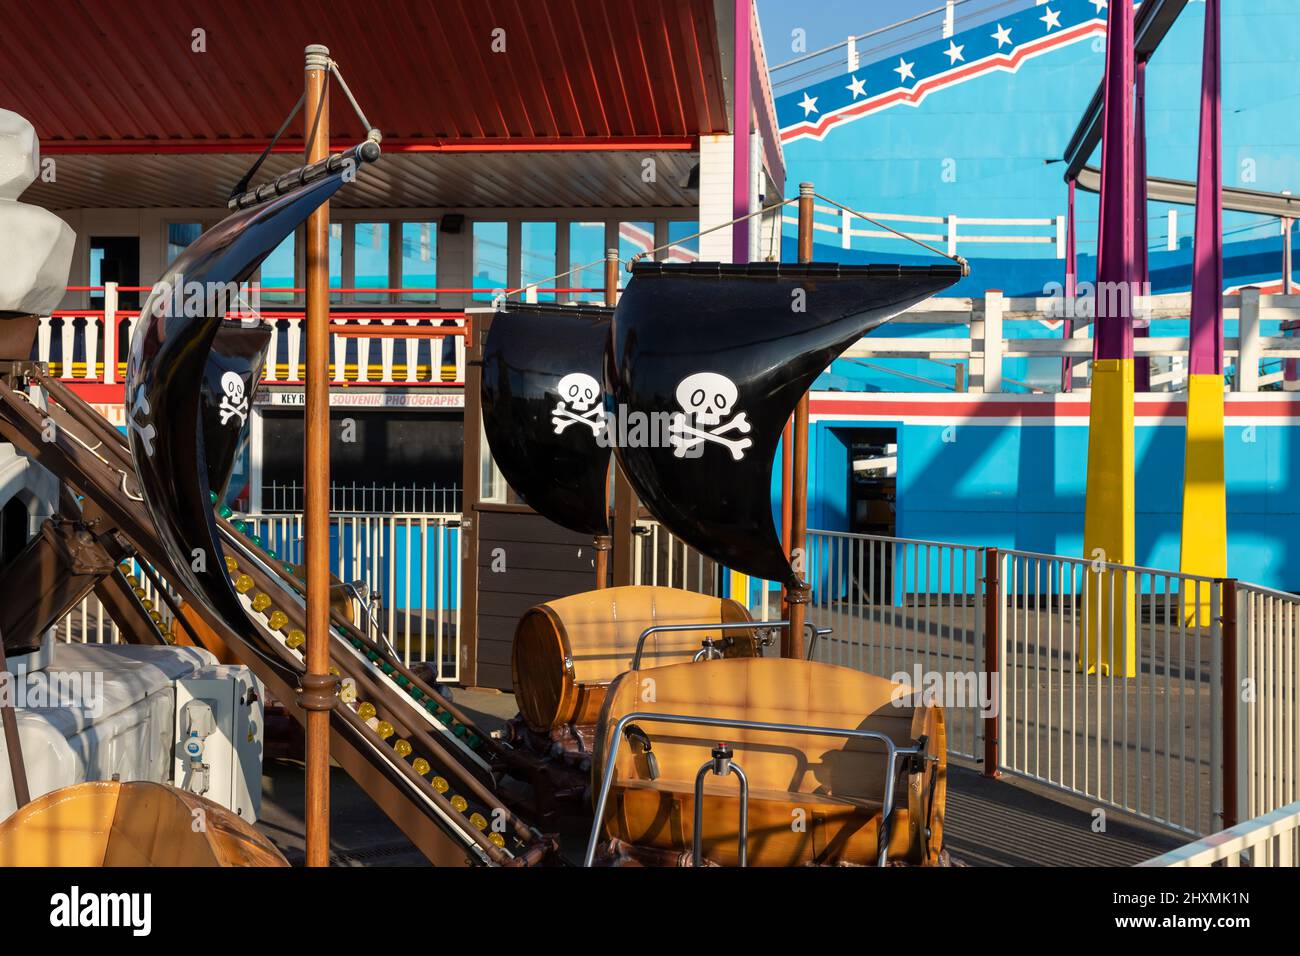 Pirate carousel ride on the Pleasure Beach in Great Yarmouth, North Norfolk,UK Stock Photo